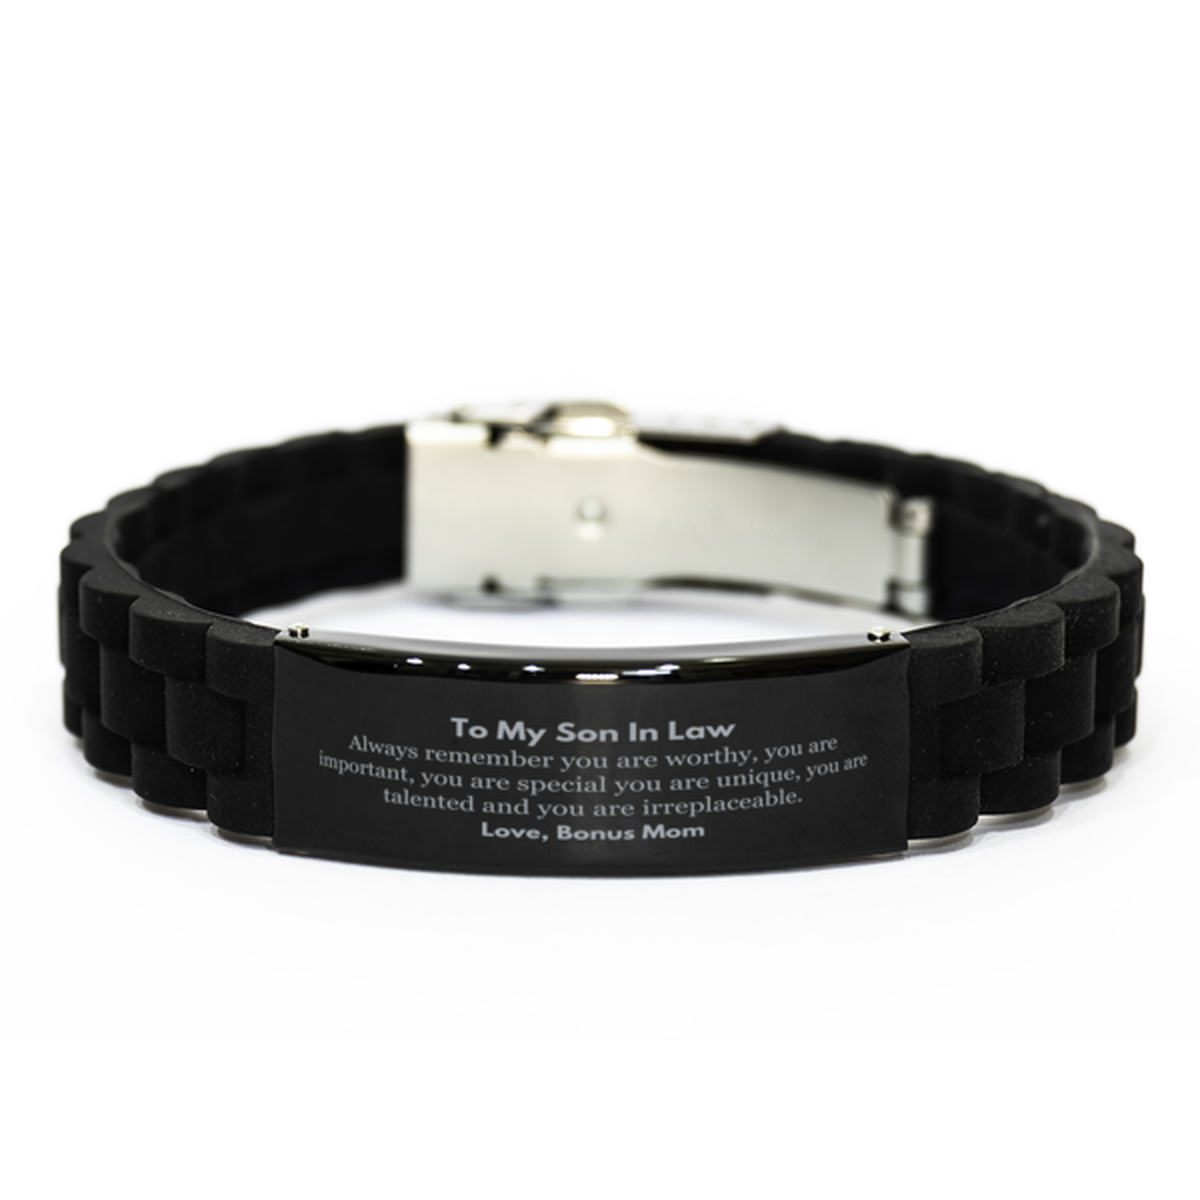 Son In Law Birthday Gifts from Bonus Mom, Inspirational Black Glidelock Clasp Bracelet for Son In Law Christmas Graduation Gifts for Son In Law Always remember you are worthy, you are important. Love, Bonus Mom